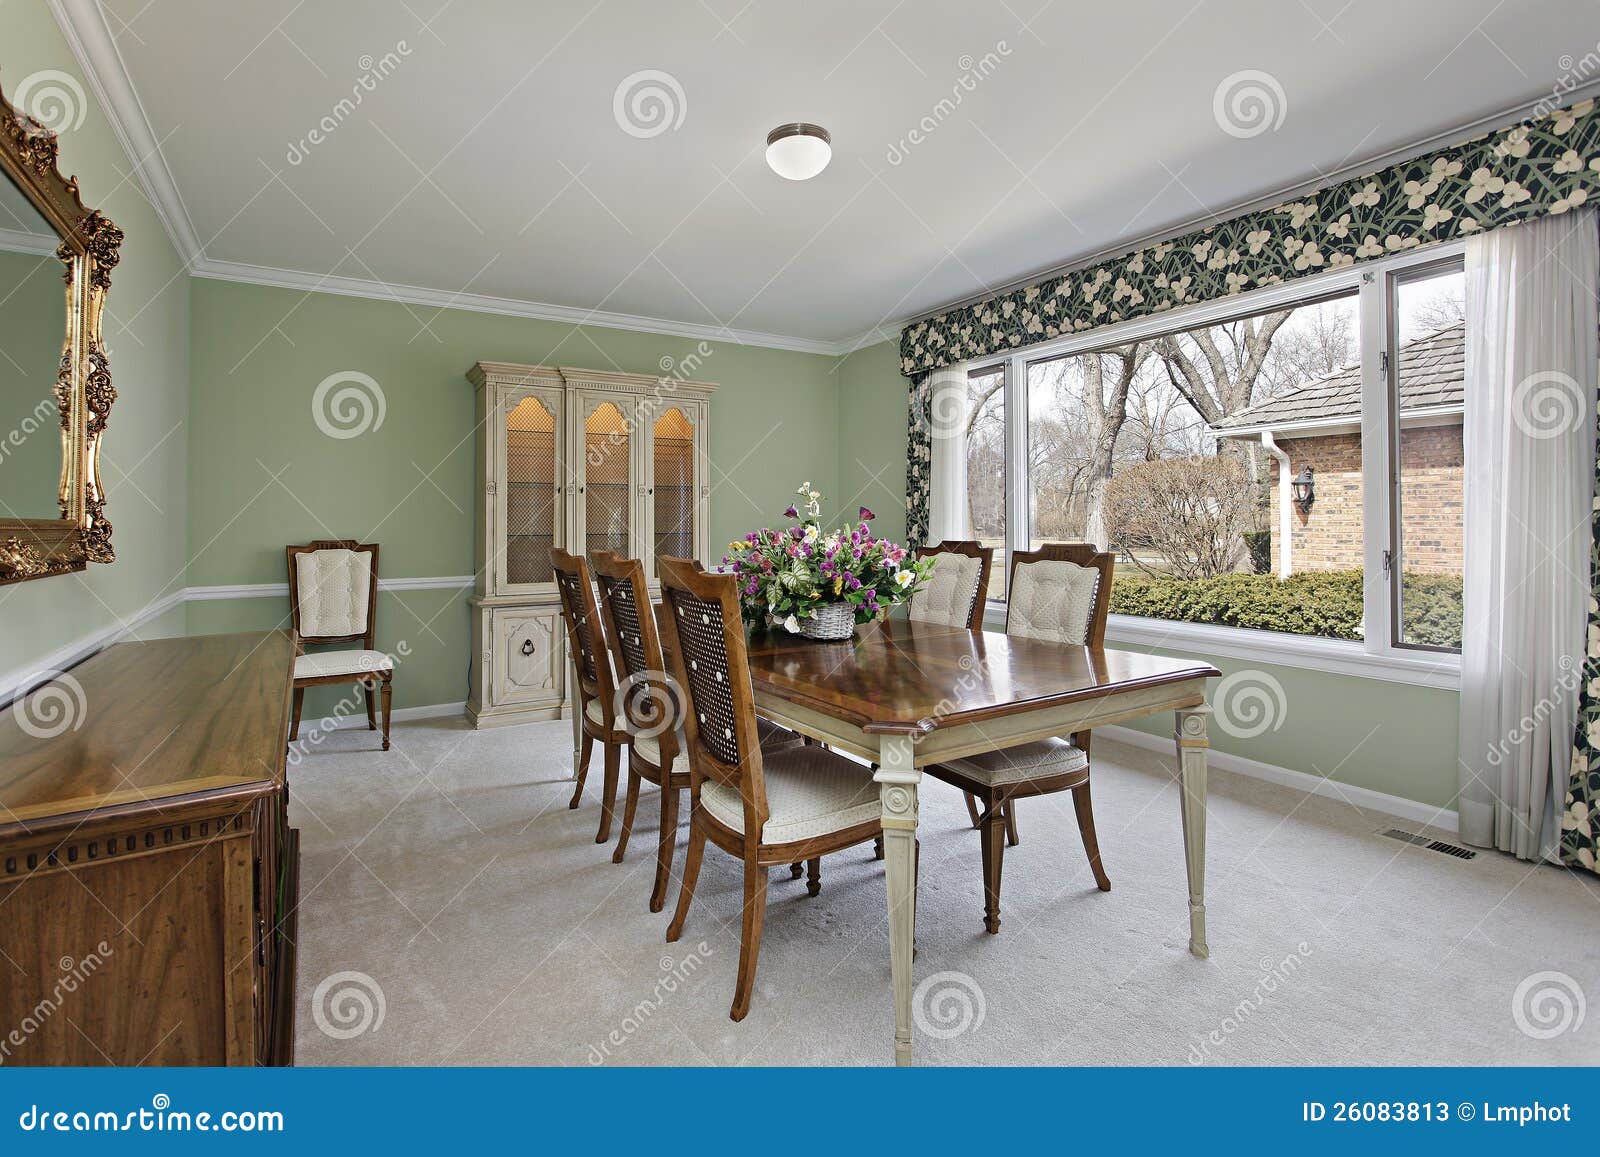 lime green walls dining room